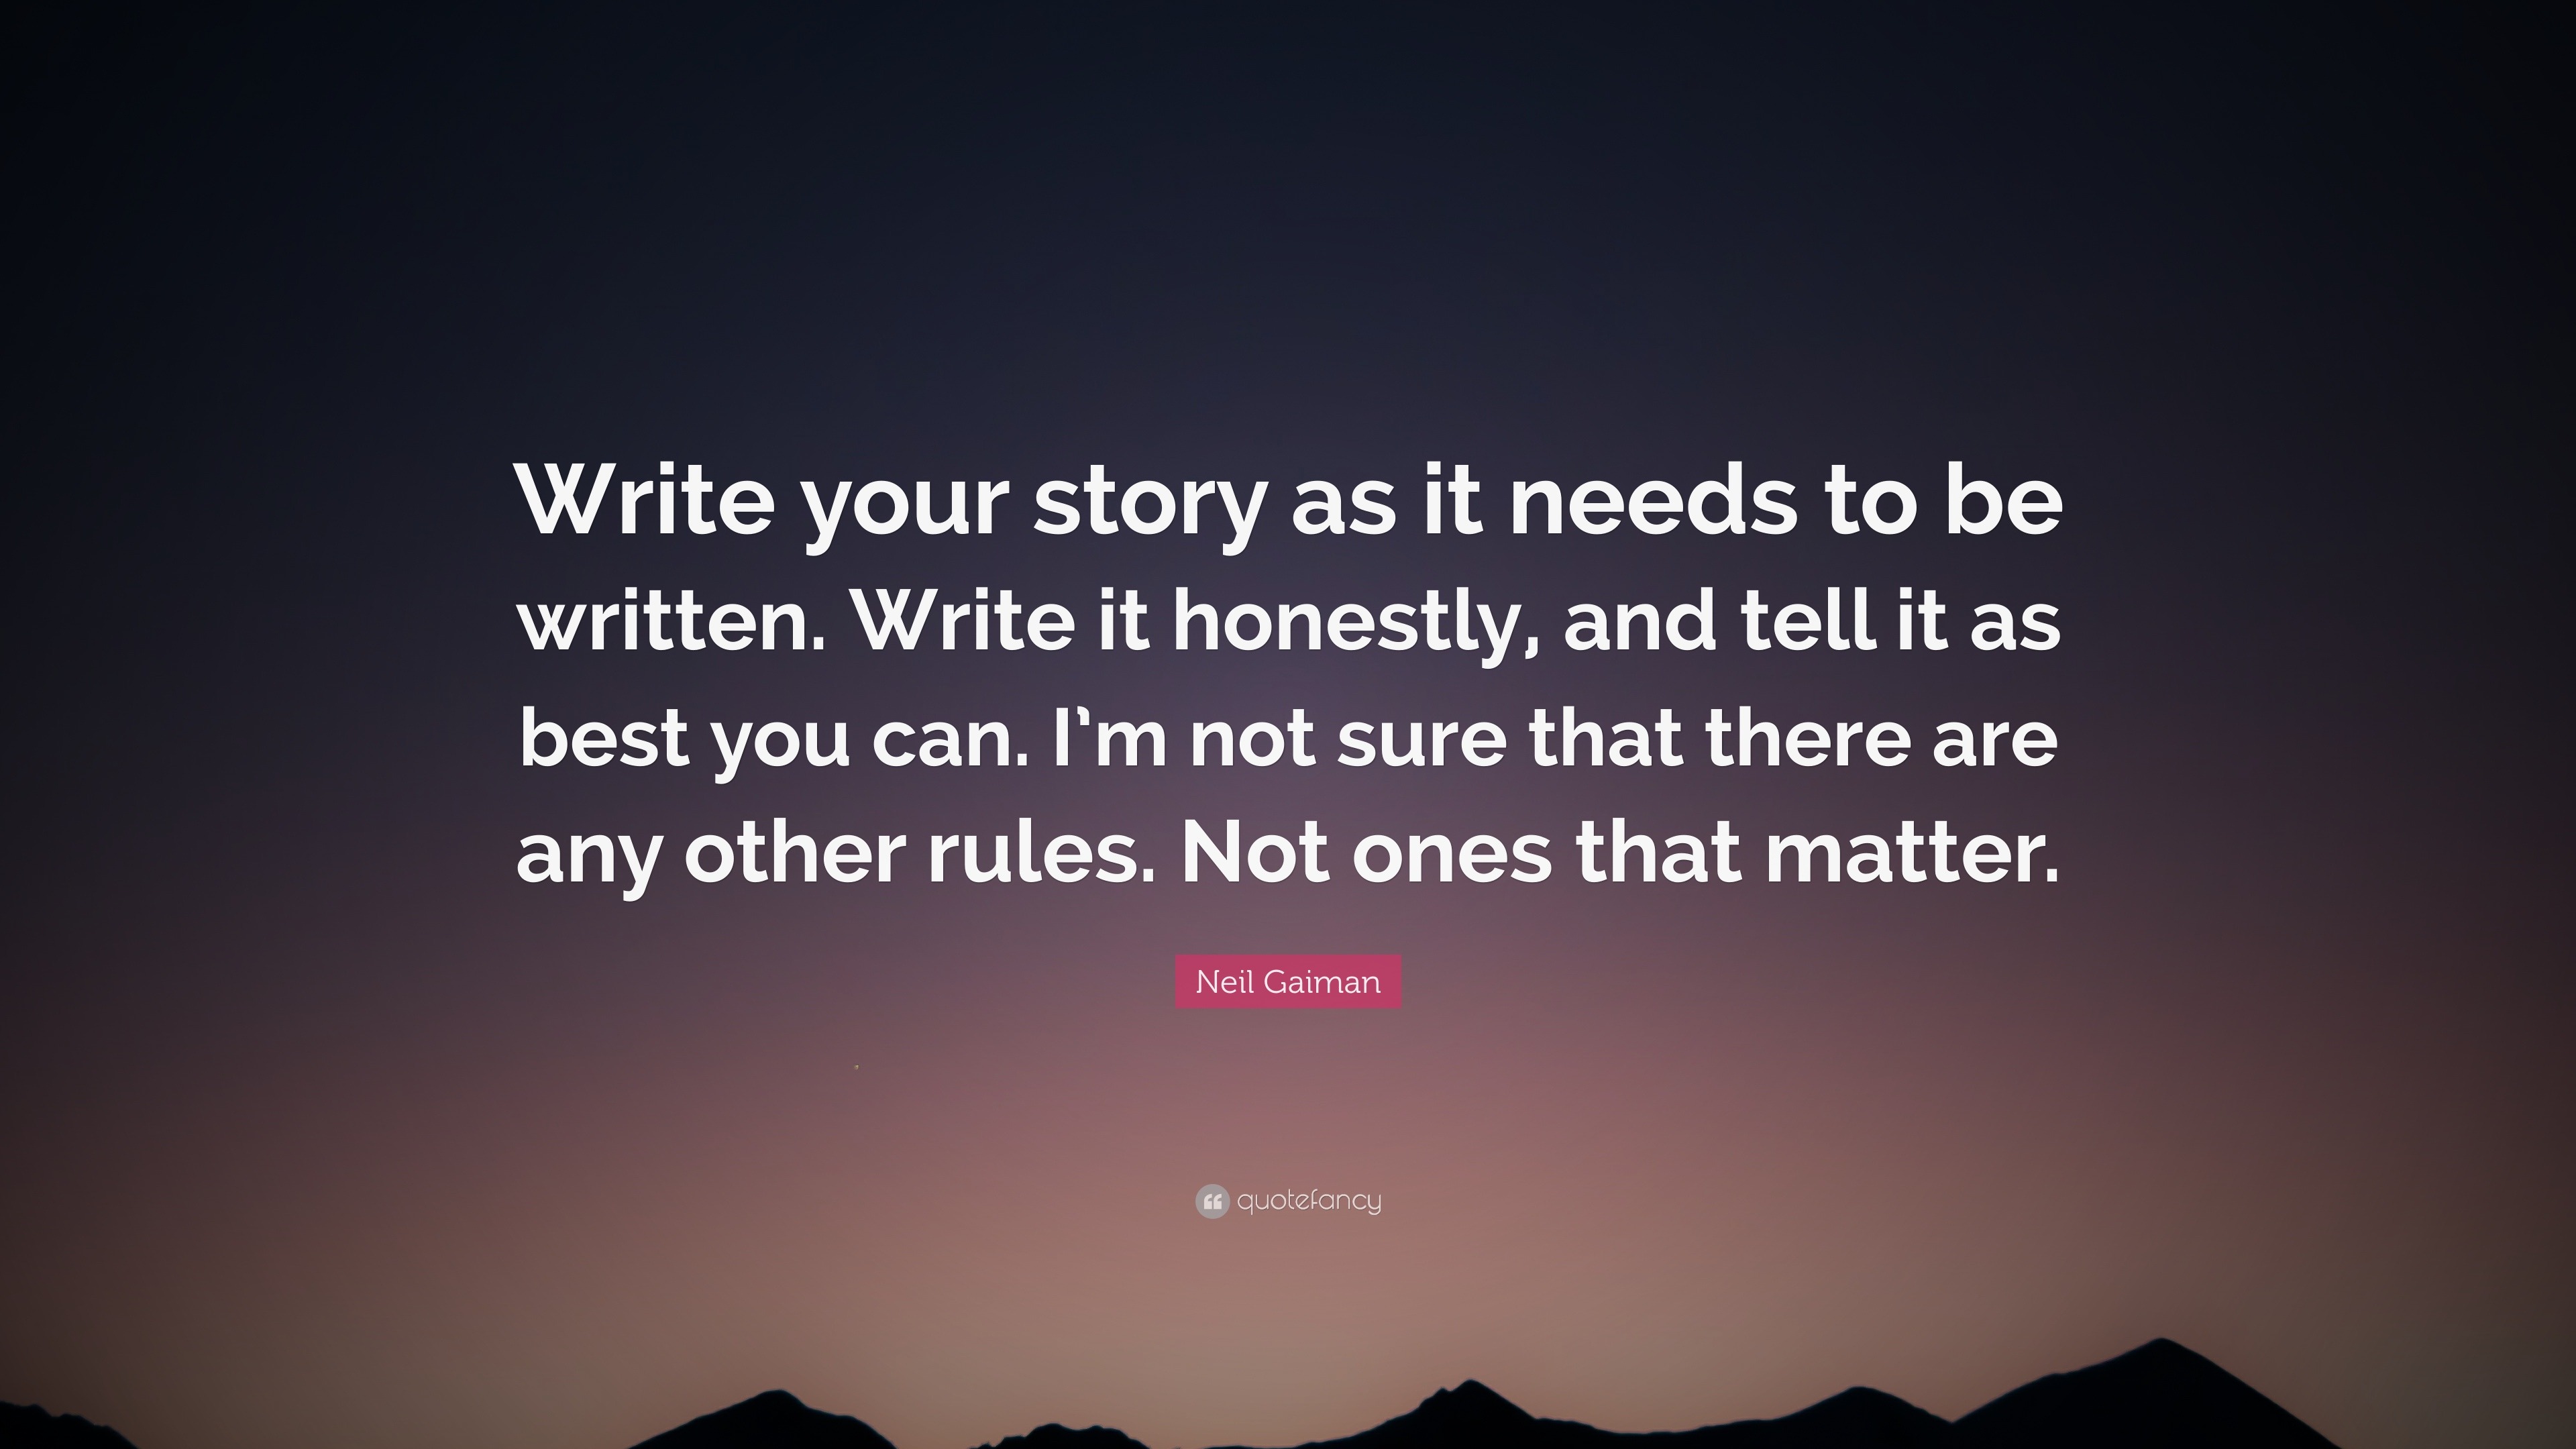 Neil Gaiman Quote: “Write your story as it needs to be written